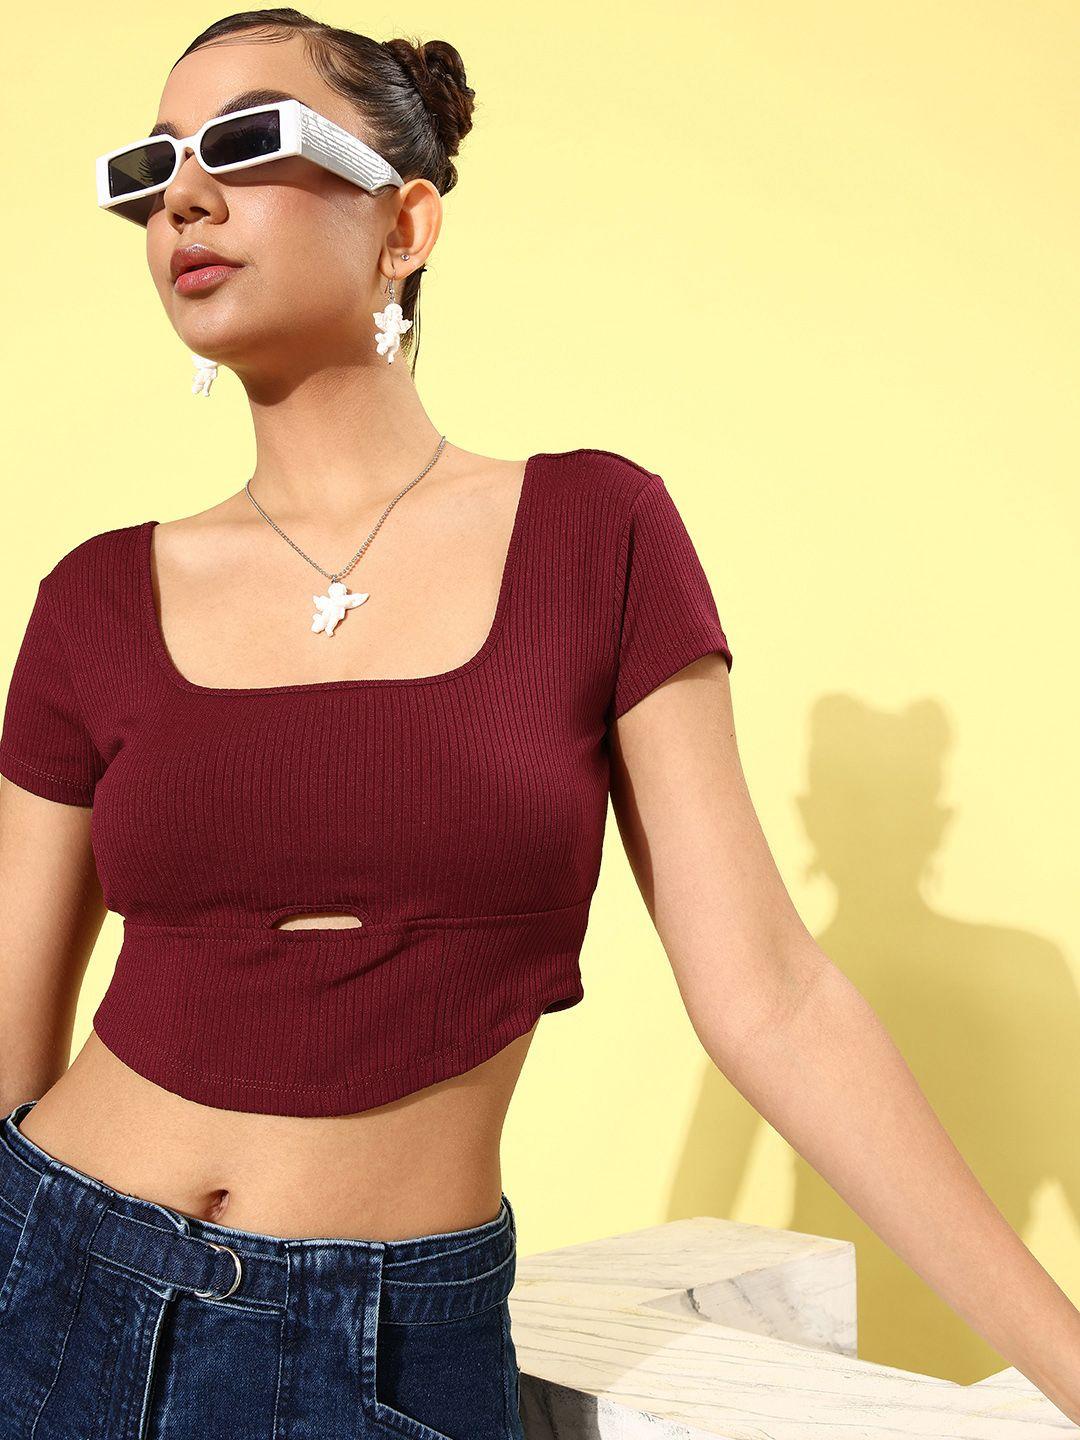 4wrd by dressberry royal maroon  ribbed 90's hollaback casually corset crop top